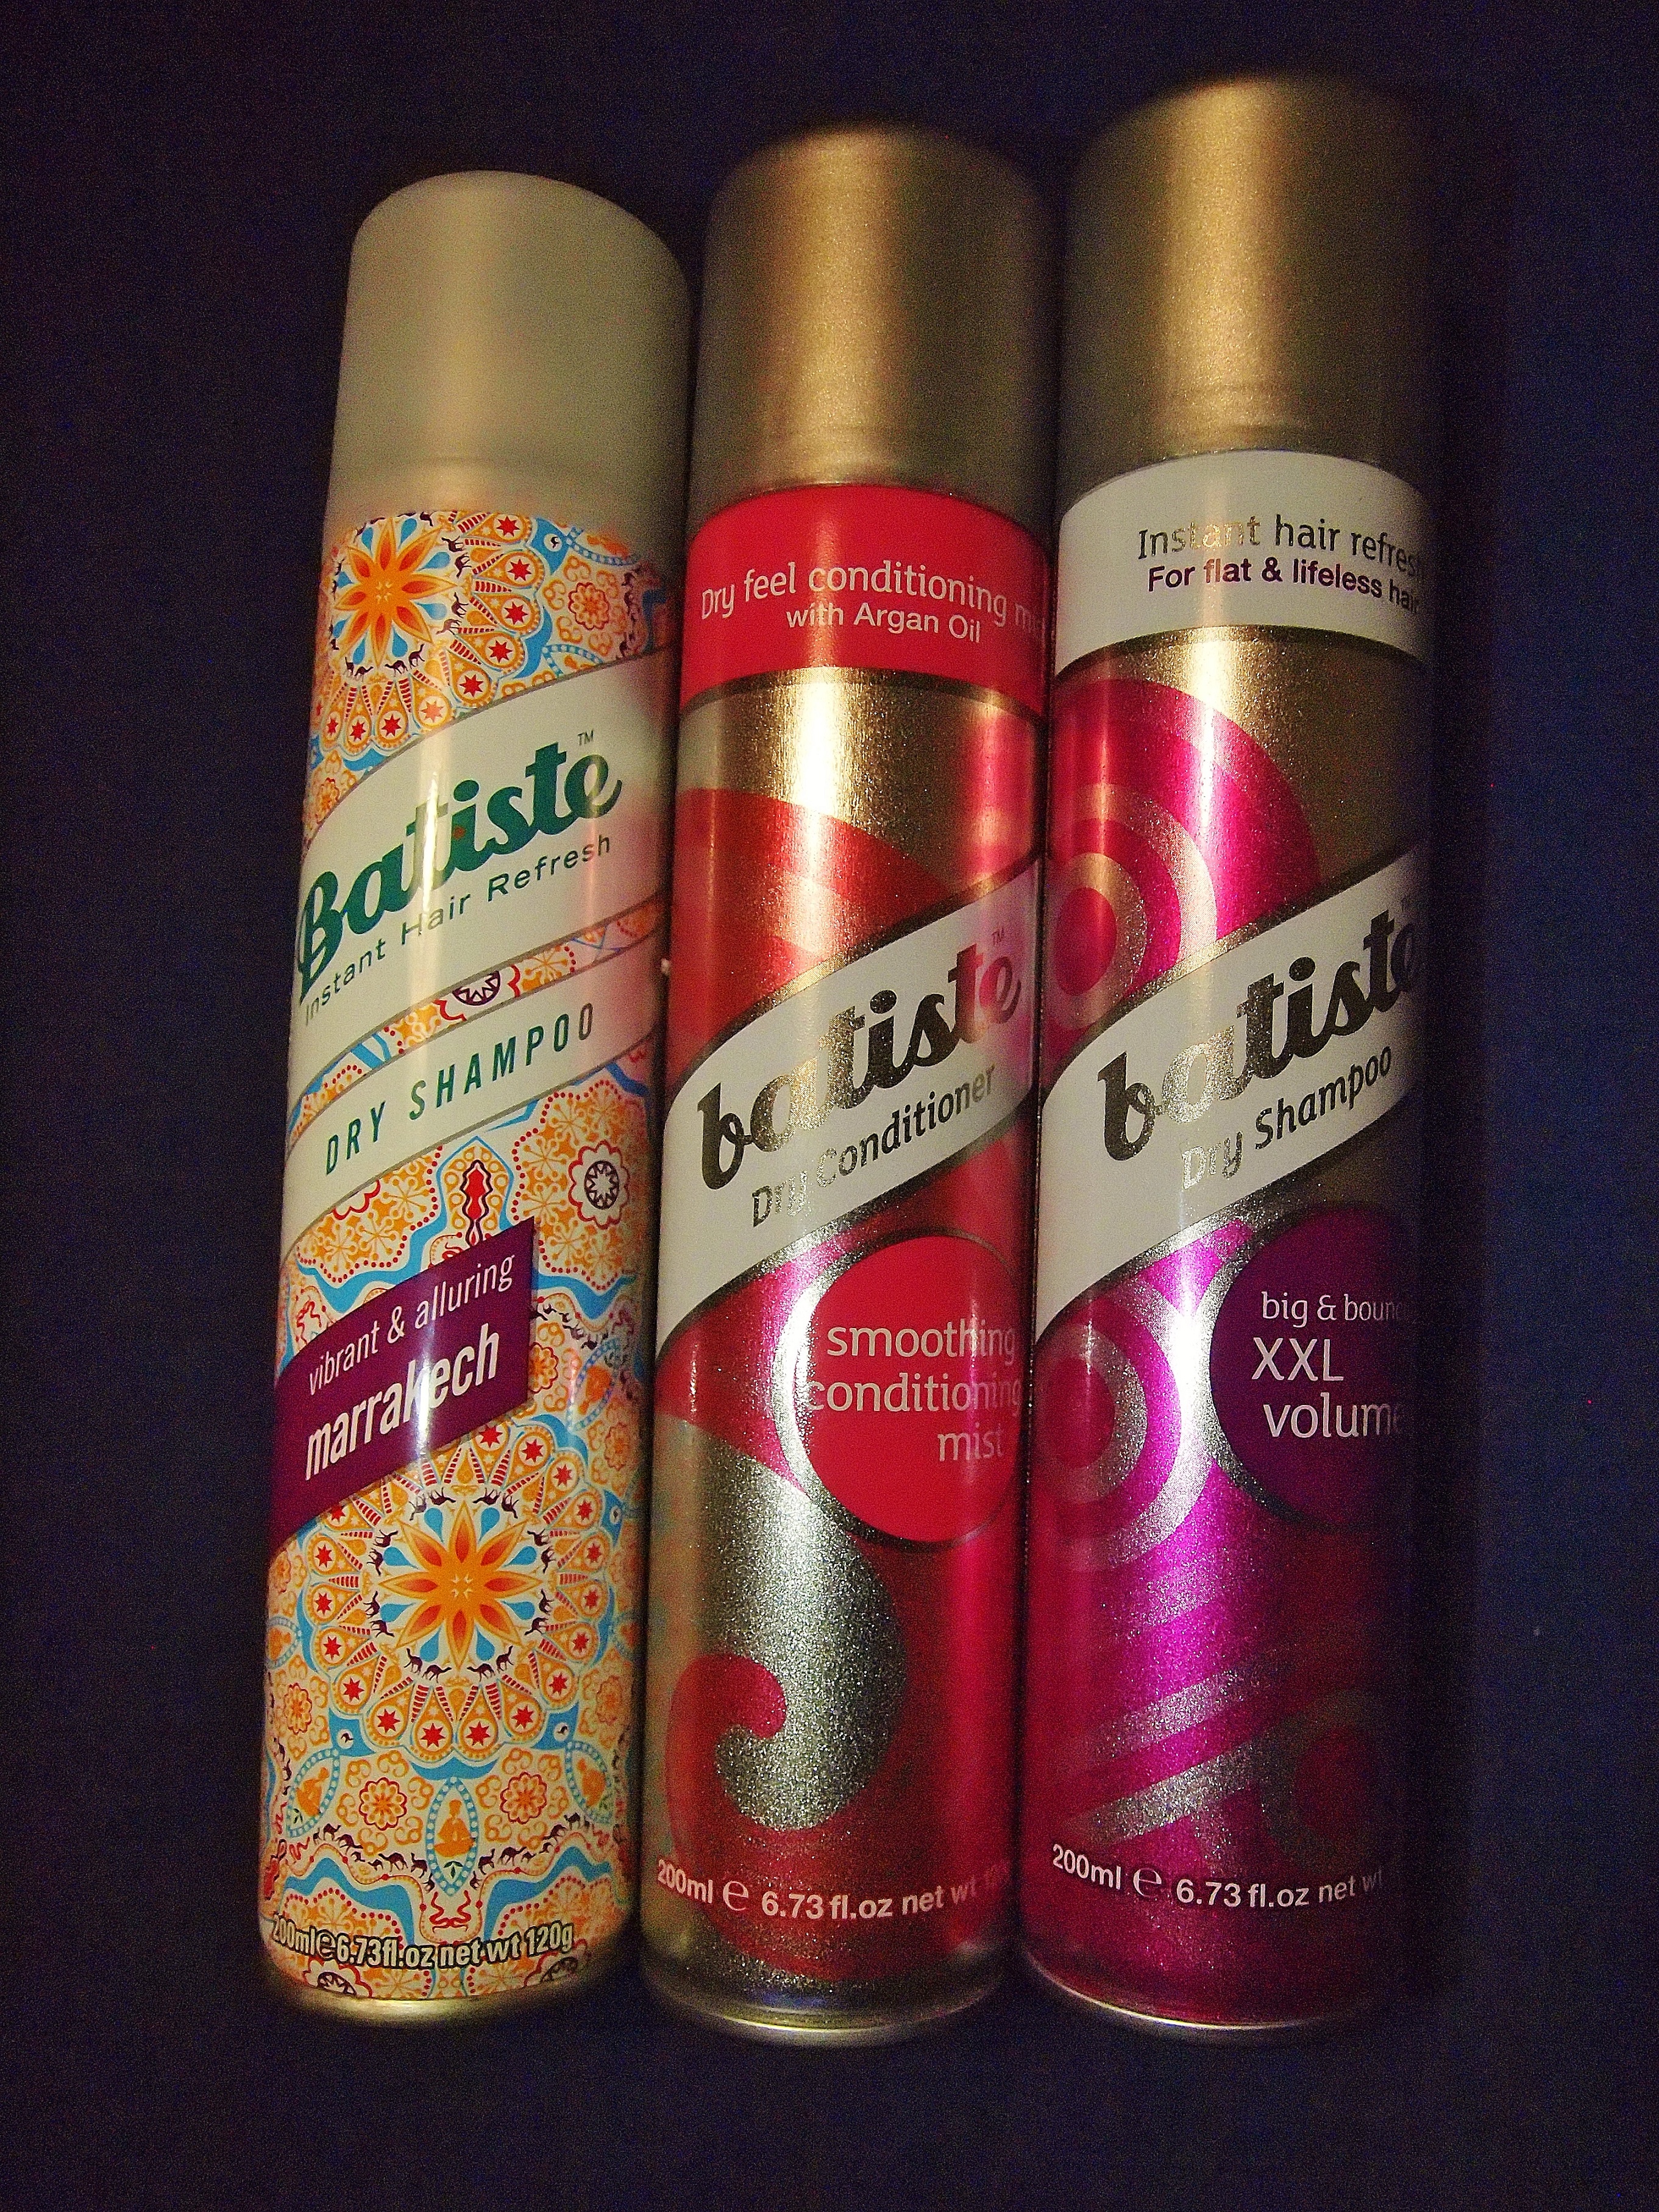 Batiste Big & Bouncy XXL Volume, Vibrant & Alluring Marrakech dry shampoo, Smoothing Conditioning Mist dry conditioner